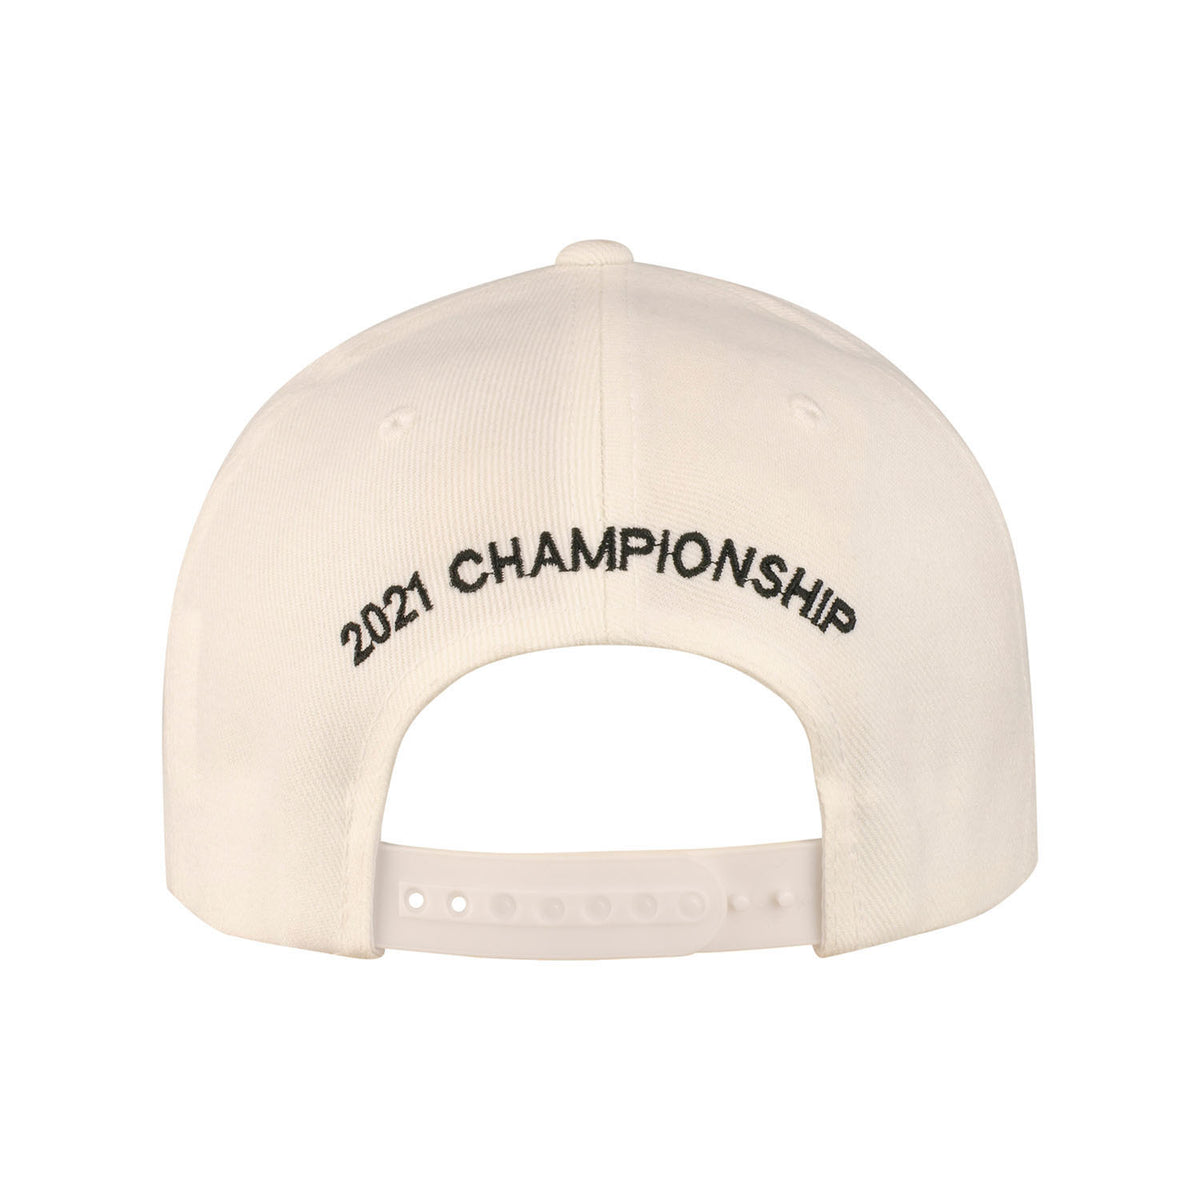 2021 PFL Championship Hat in White - Back View